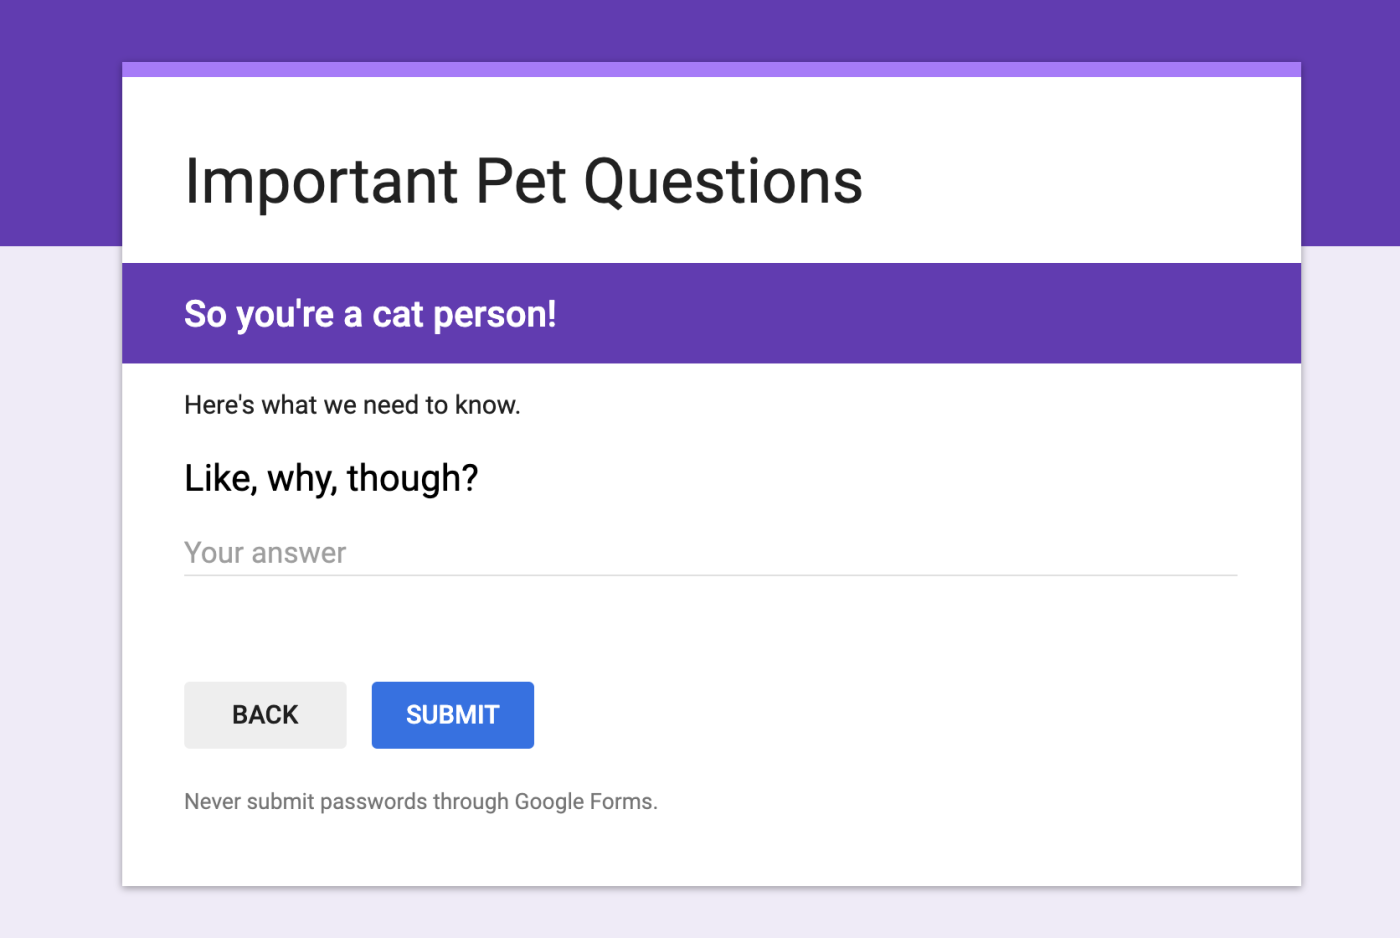 Google Forms logic: submit button